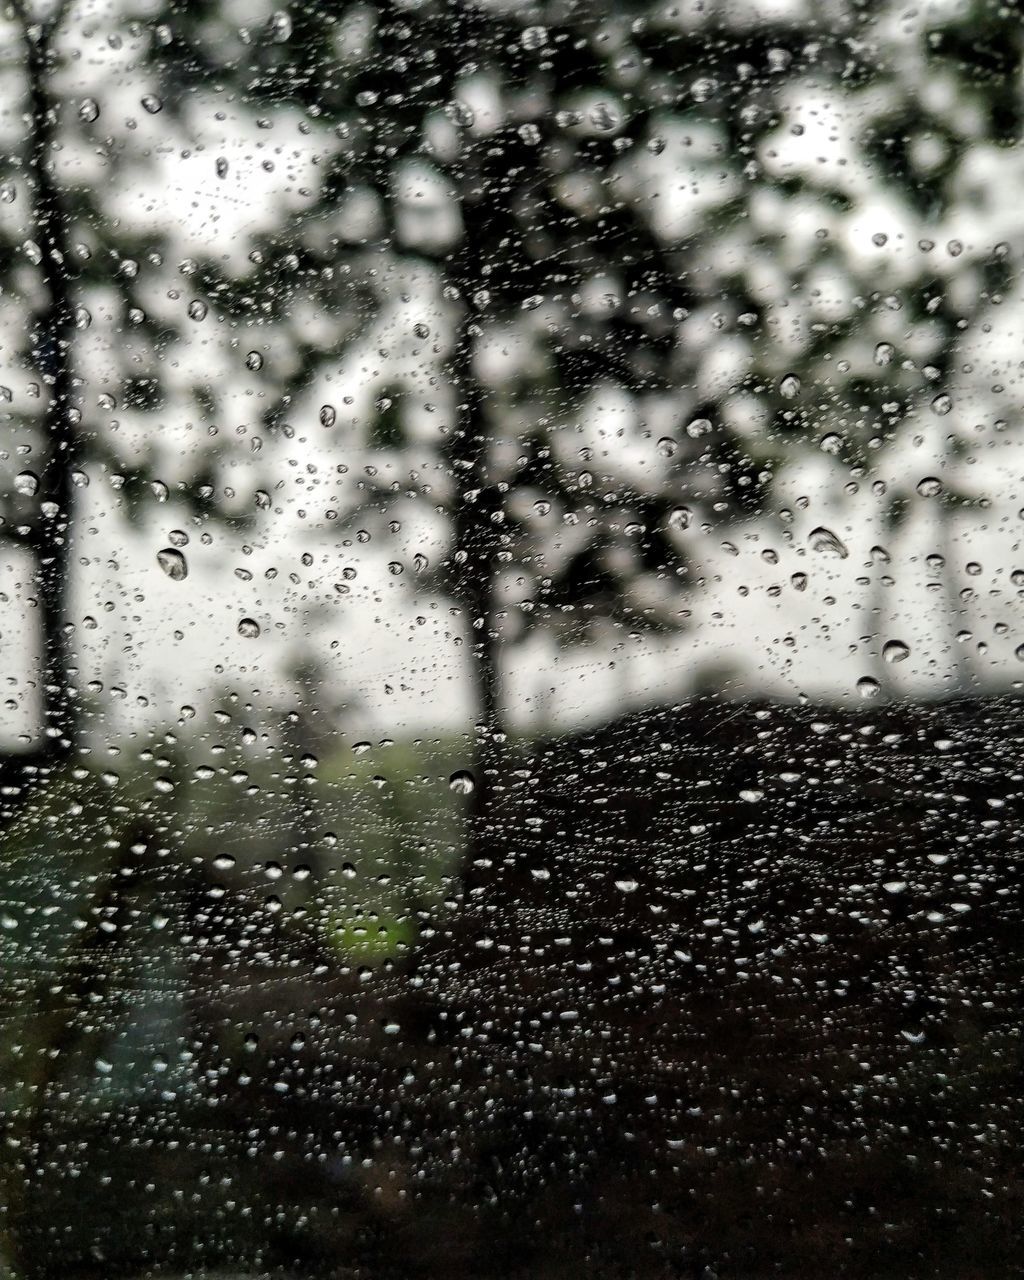 drop, wet, water, transparent, window, rain, glass - material, no people, nature, raindrop, day, city, indoors, glass, close-up, full frame, plant, rainy season, purity